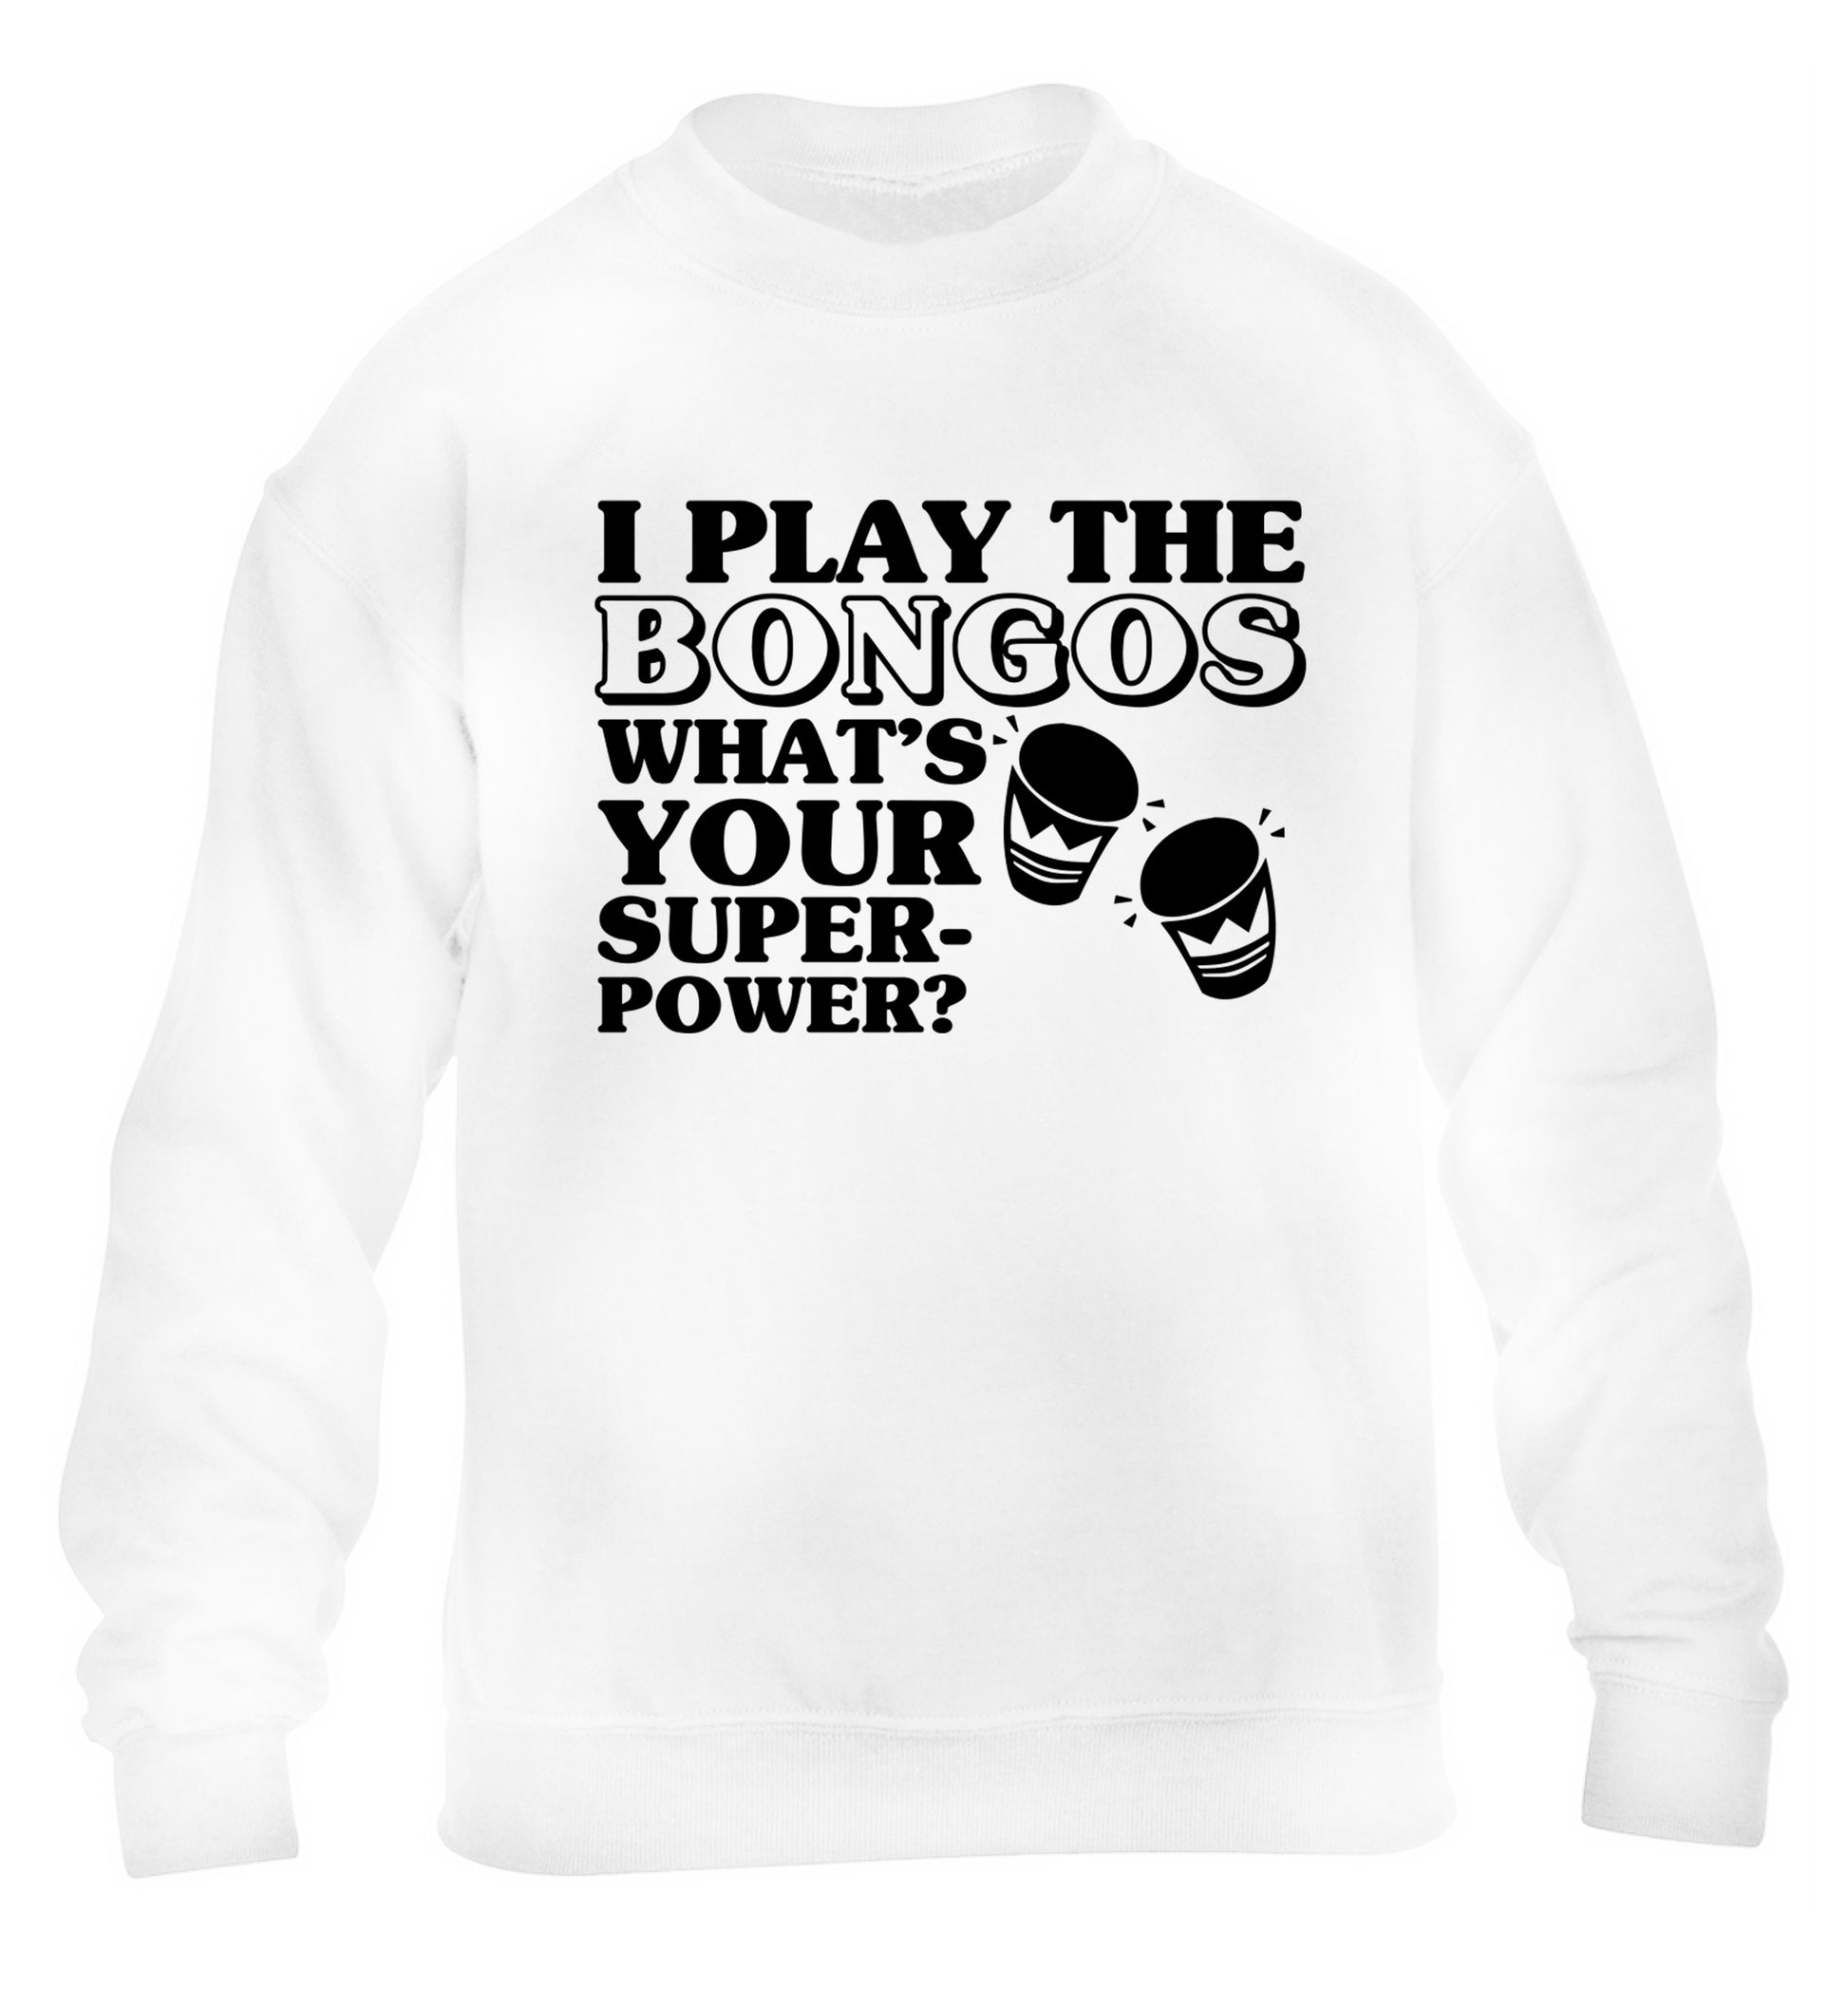 I play the bongos what's your superpower? children's white sweater 12-14 Years